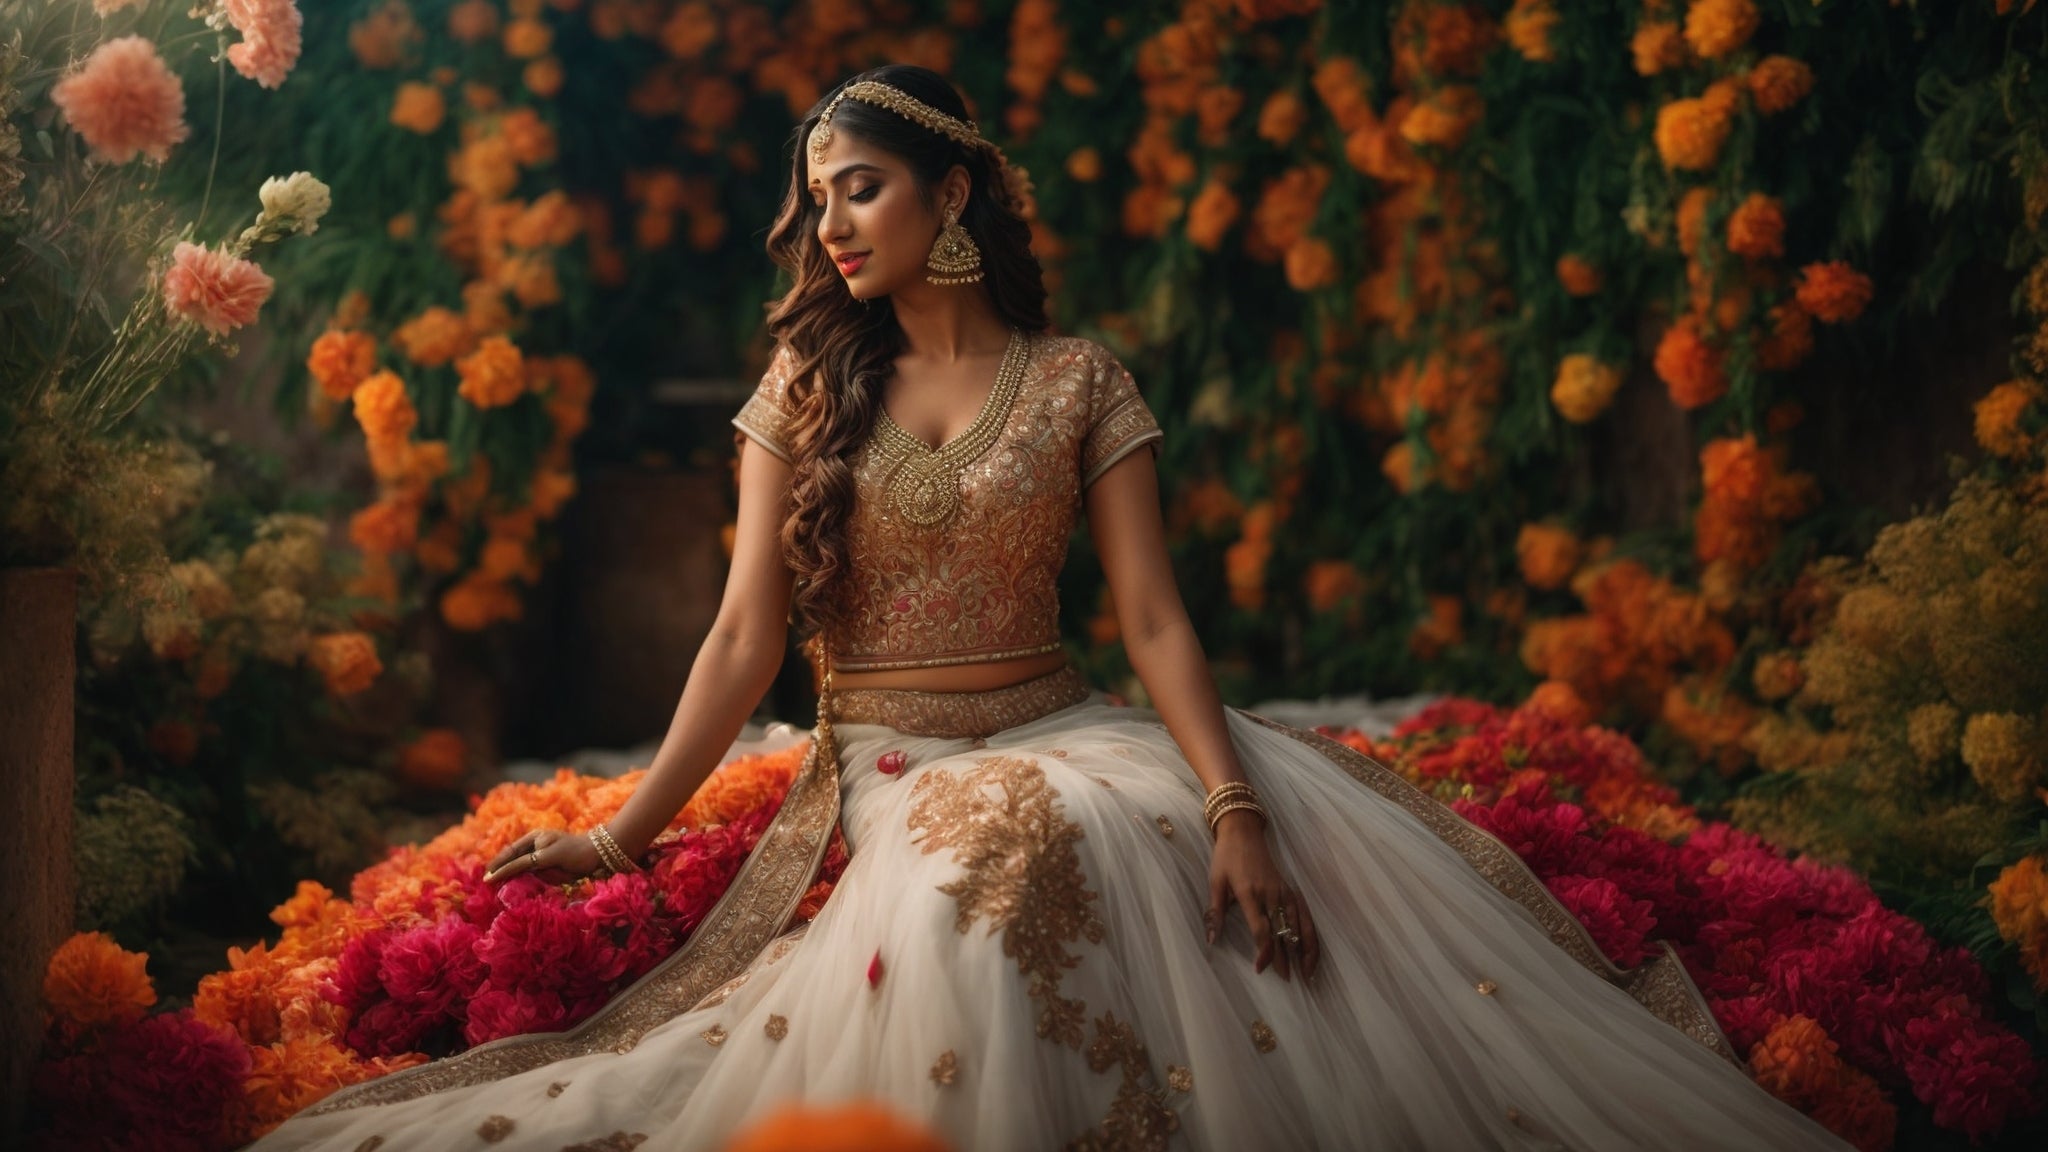 Eco-Conscious Bridal Lehengas: Sustainable Options for the Modern Bride